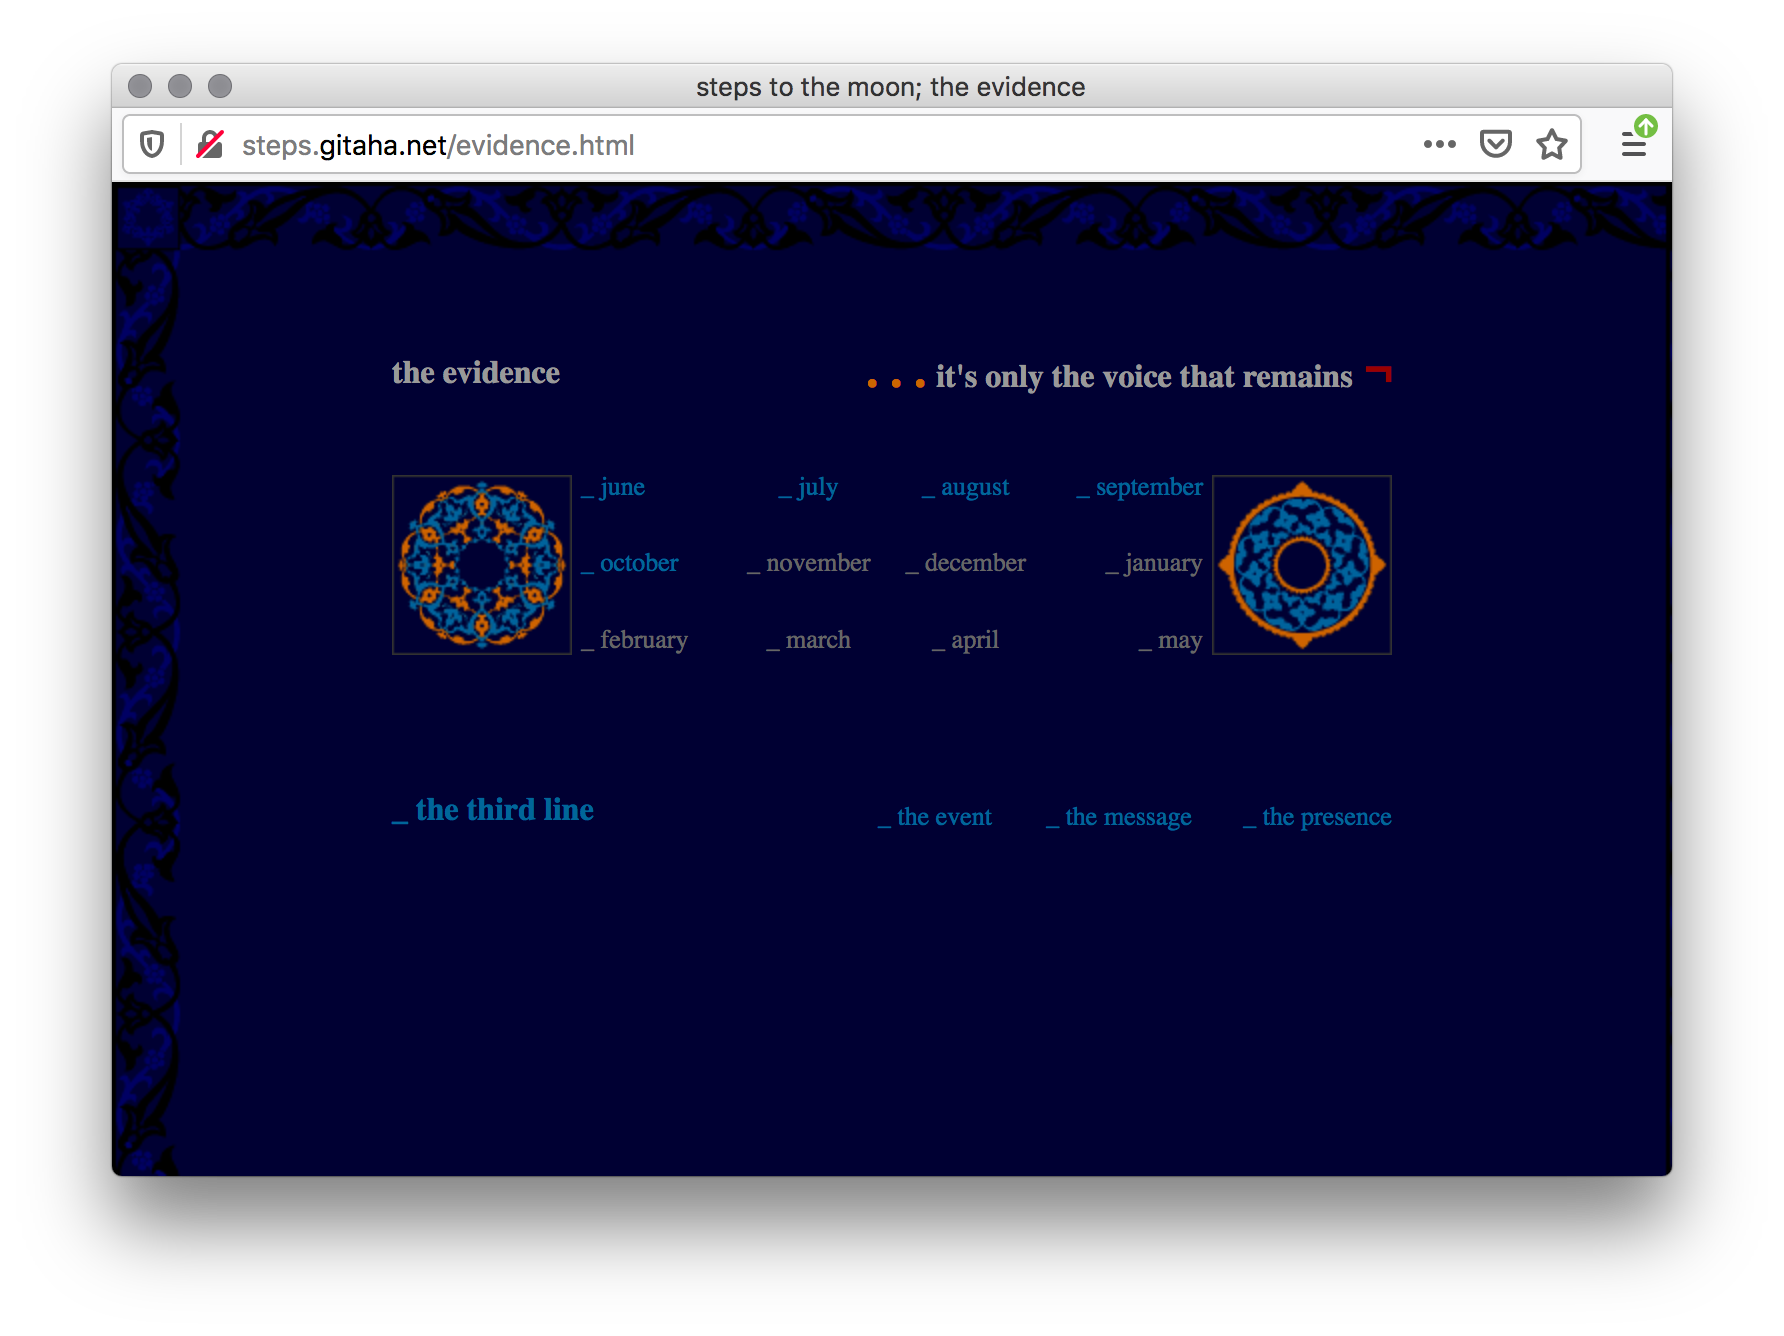 Screenshot of navy blue webpage with a decorative black and blue border. The center has months typed in grey in a grid form are in between two orange and blue geometric symbols with lines of grey and blue text on the top and bottom.